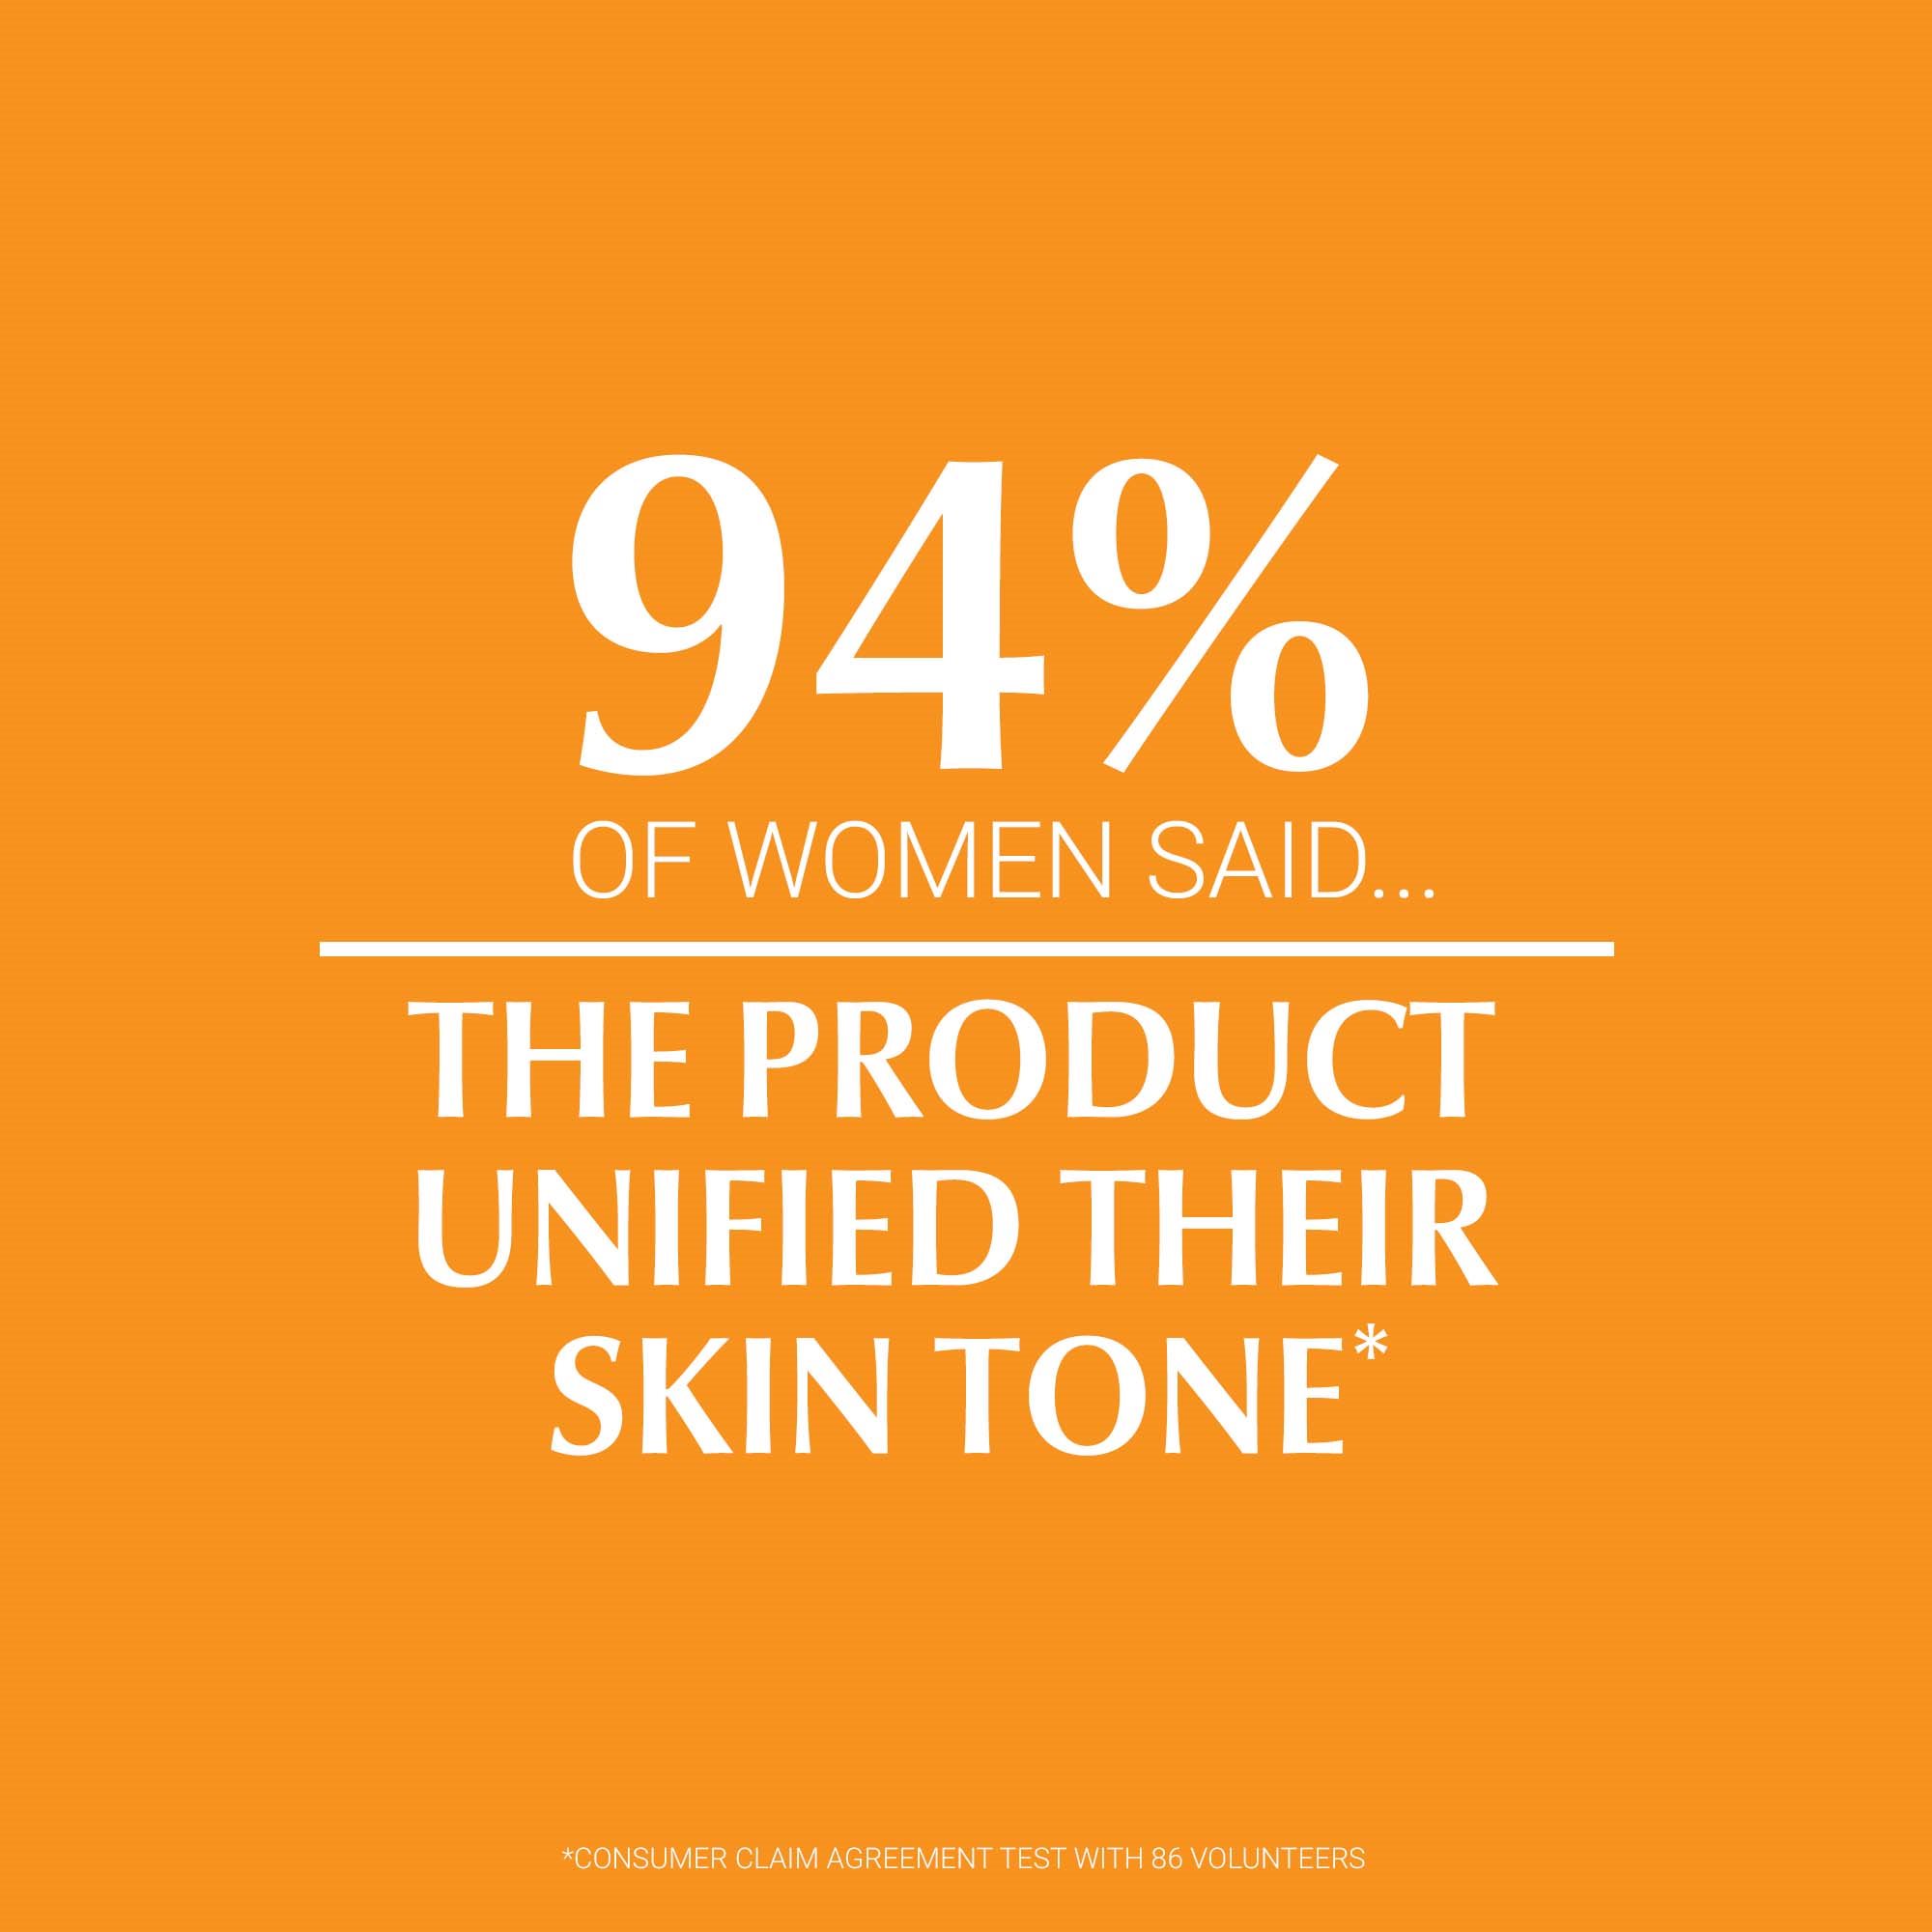 94% of woman say Eucerin Sun Protection Pigment Control Tinted Light SPF50+ unified their skin tone. 